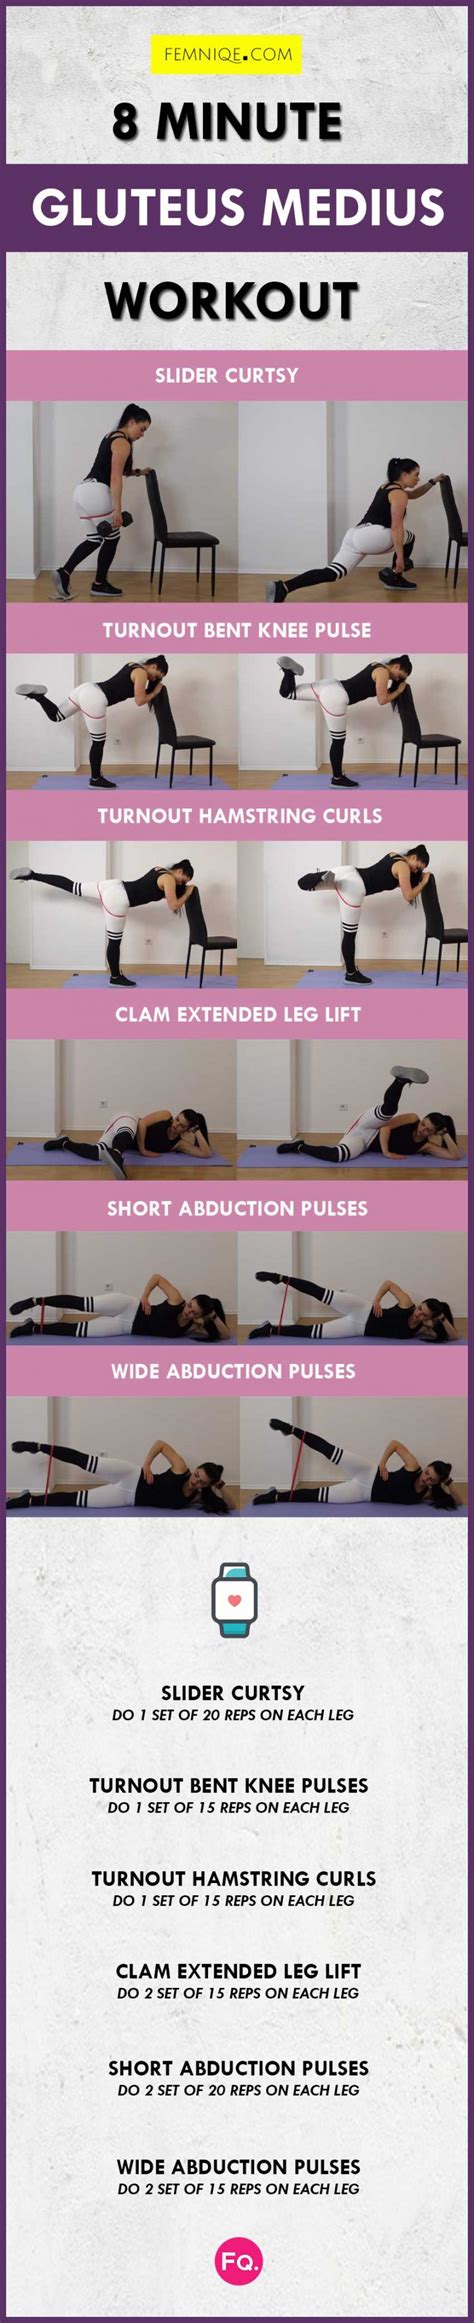 gluteus medius exercises 8 minute to rounder and bigger glute curves